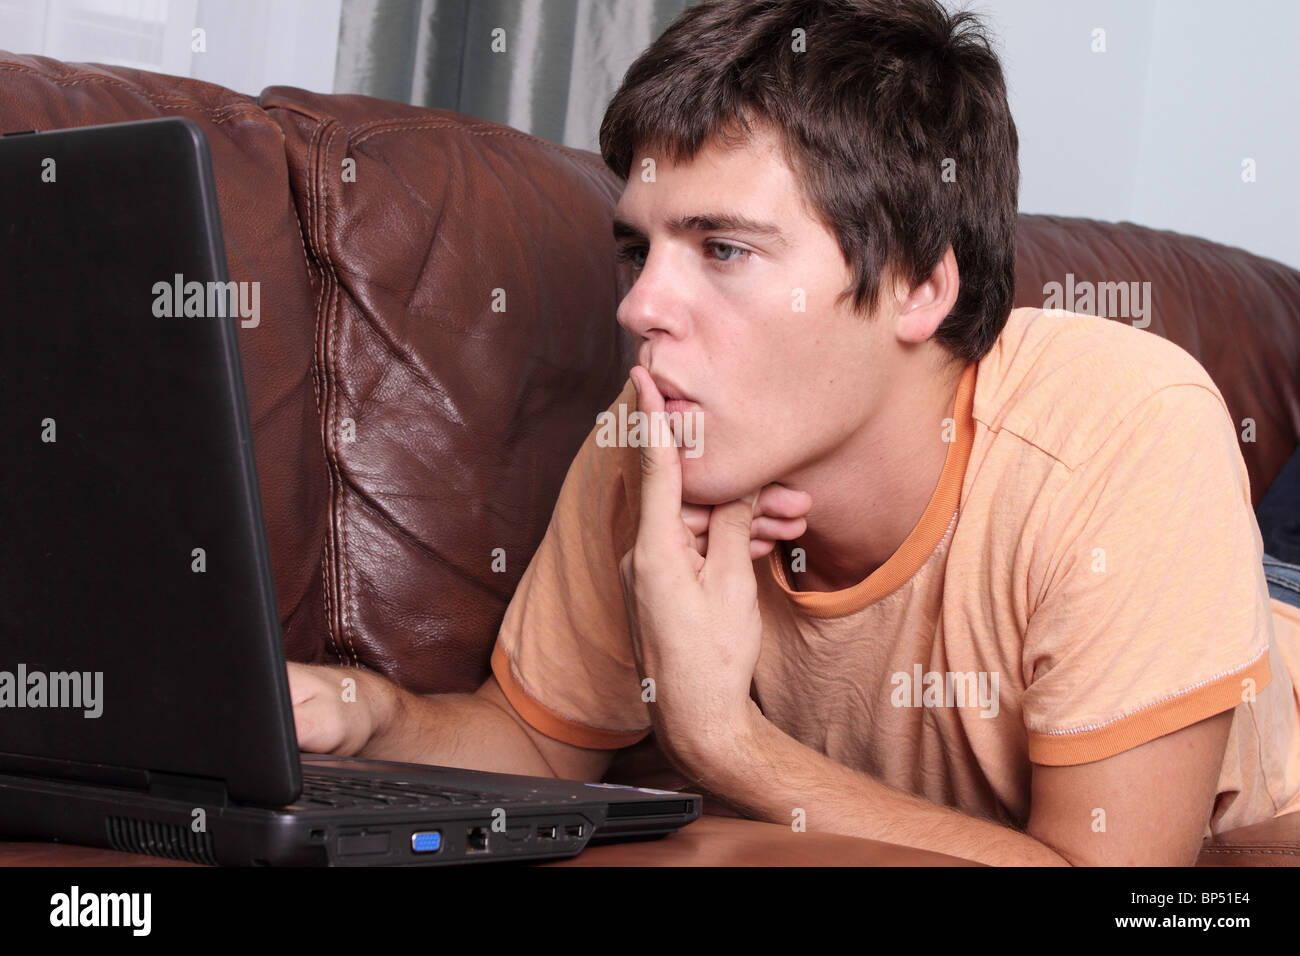 young man at the laptop computer Stock Photo